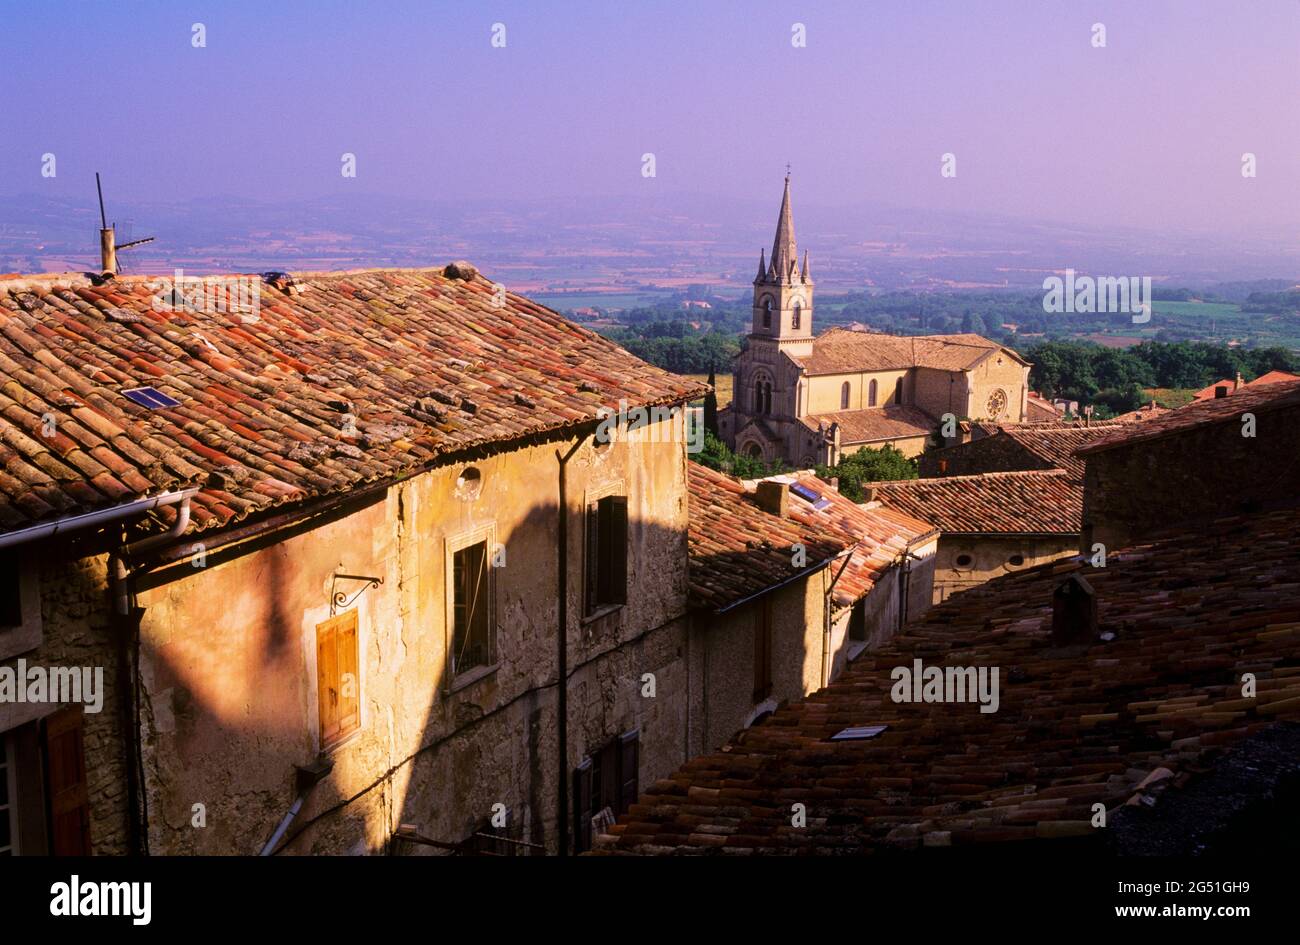 Elevated view of old town with church, Bonnieux, Provence, France Stock Photo